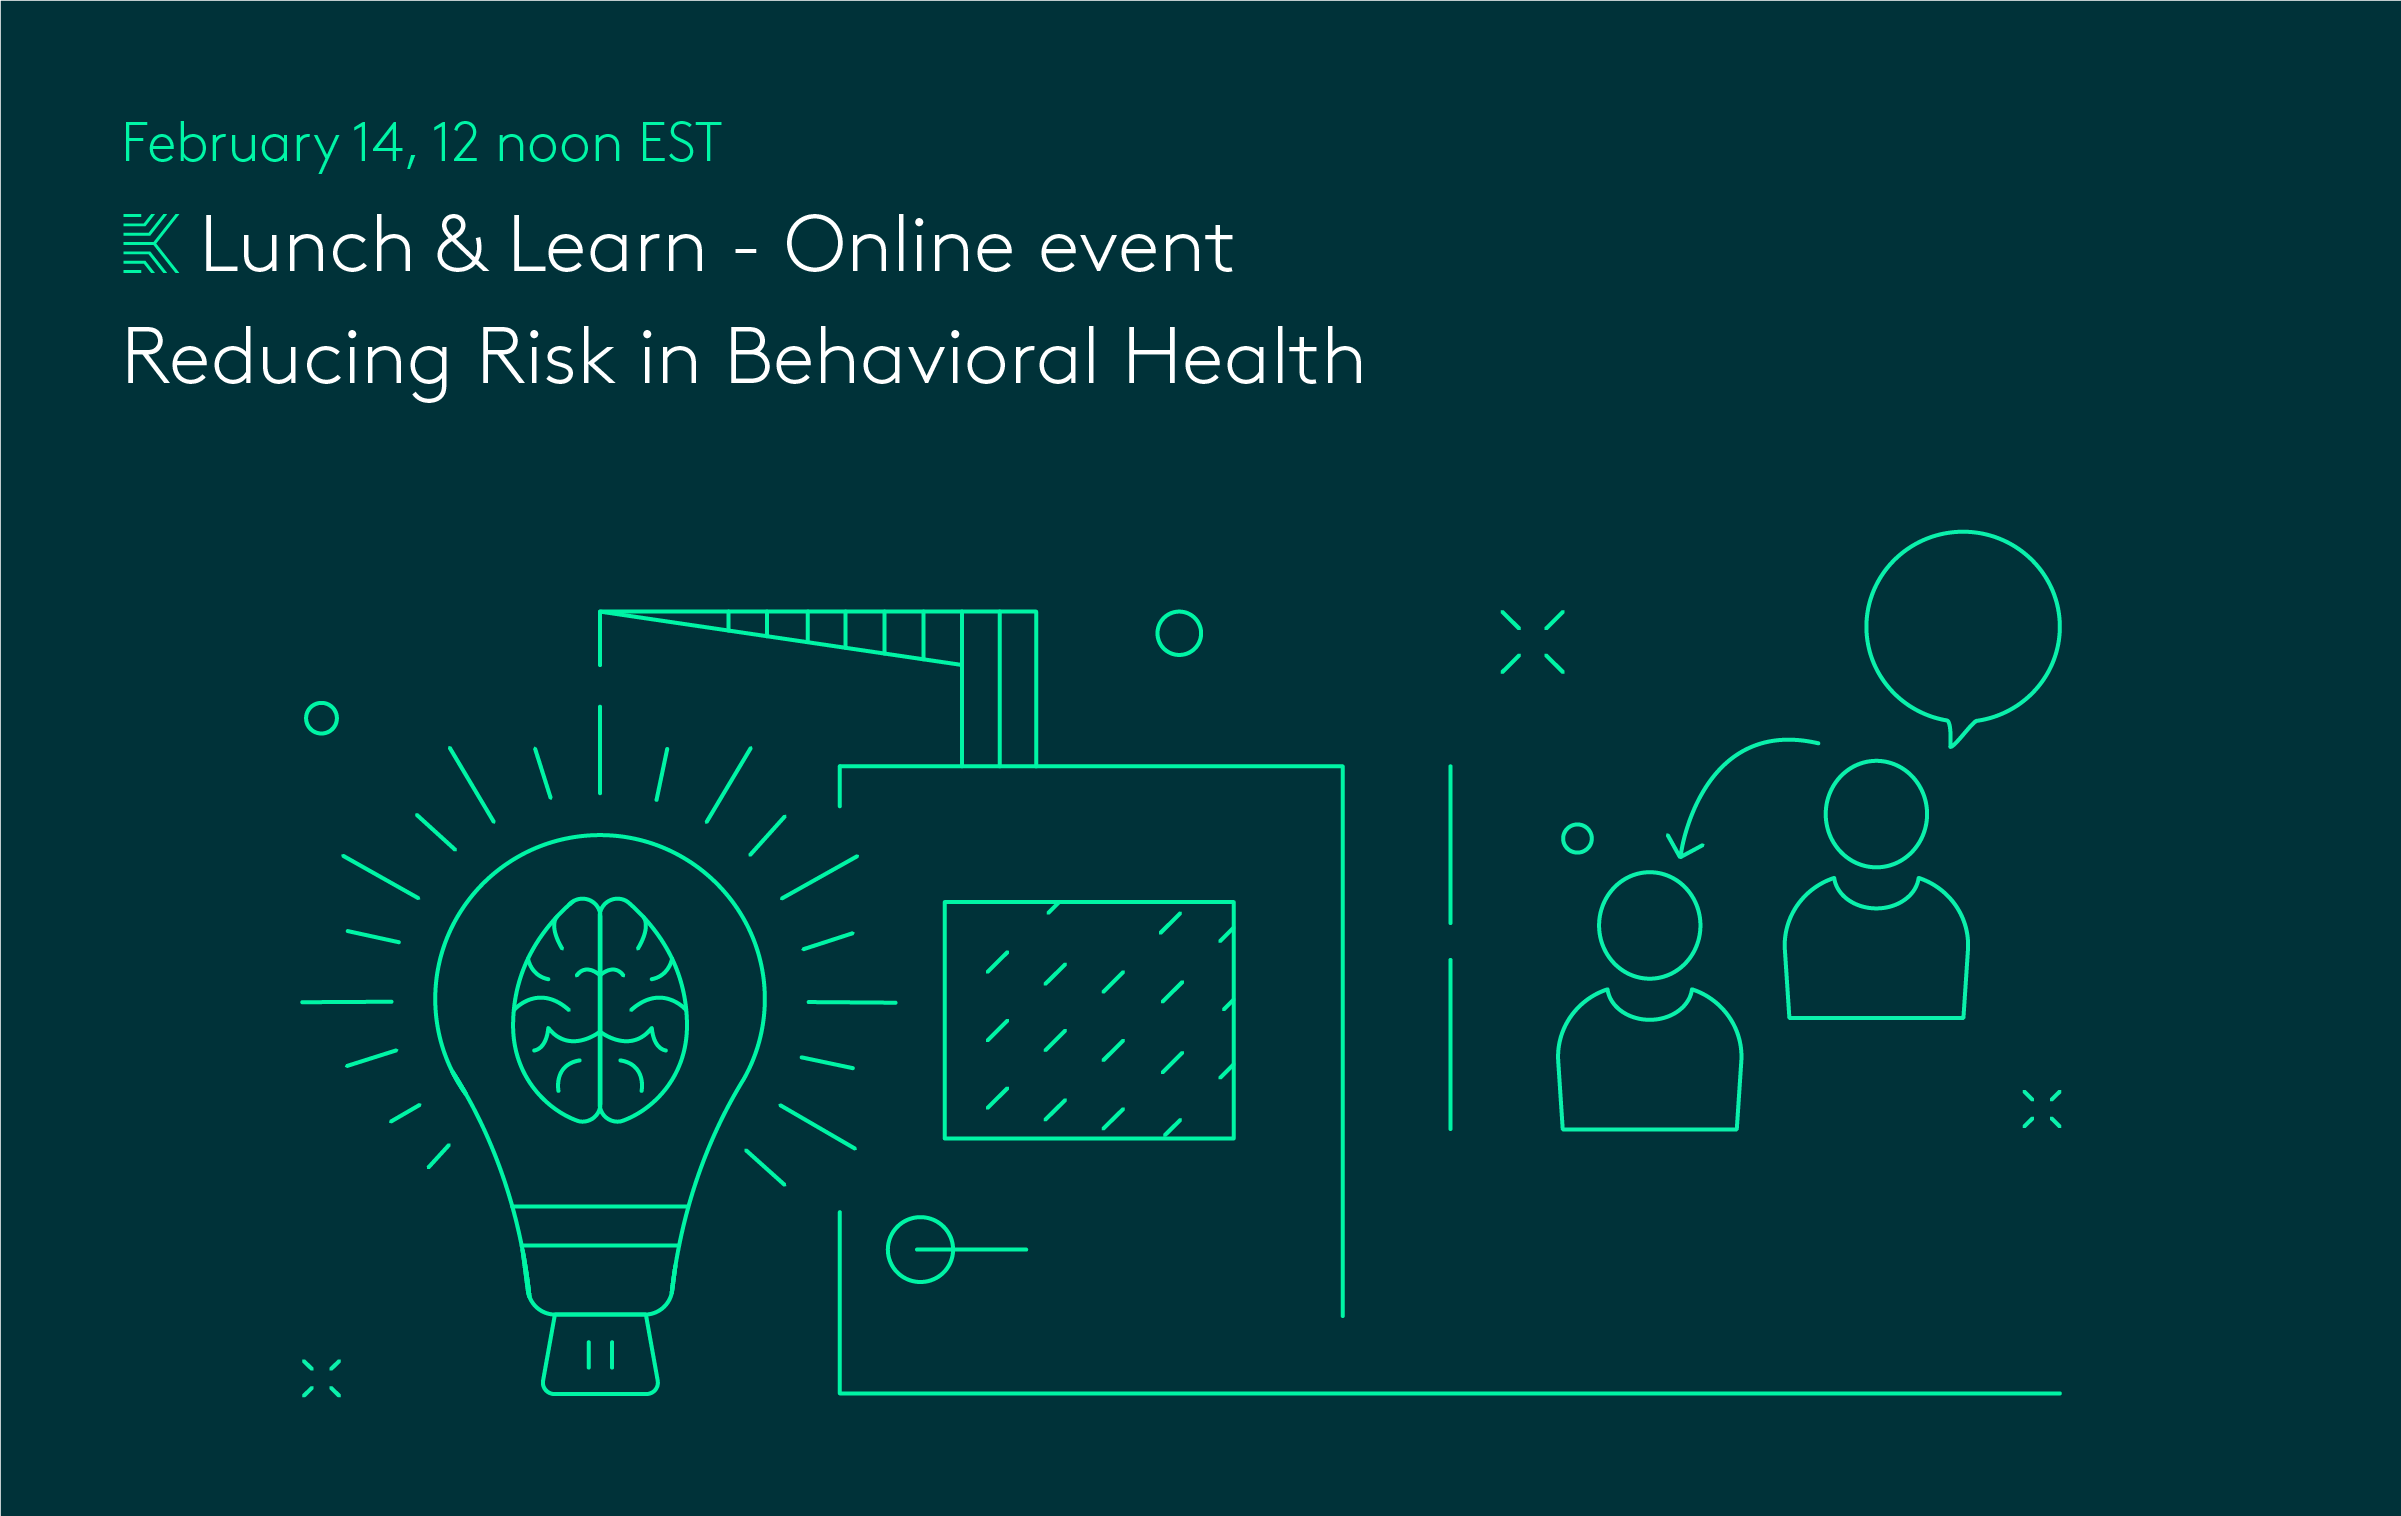 Online Event addressing safety in behavioral health. The event takes place on Wednesday, February 14.